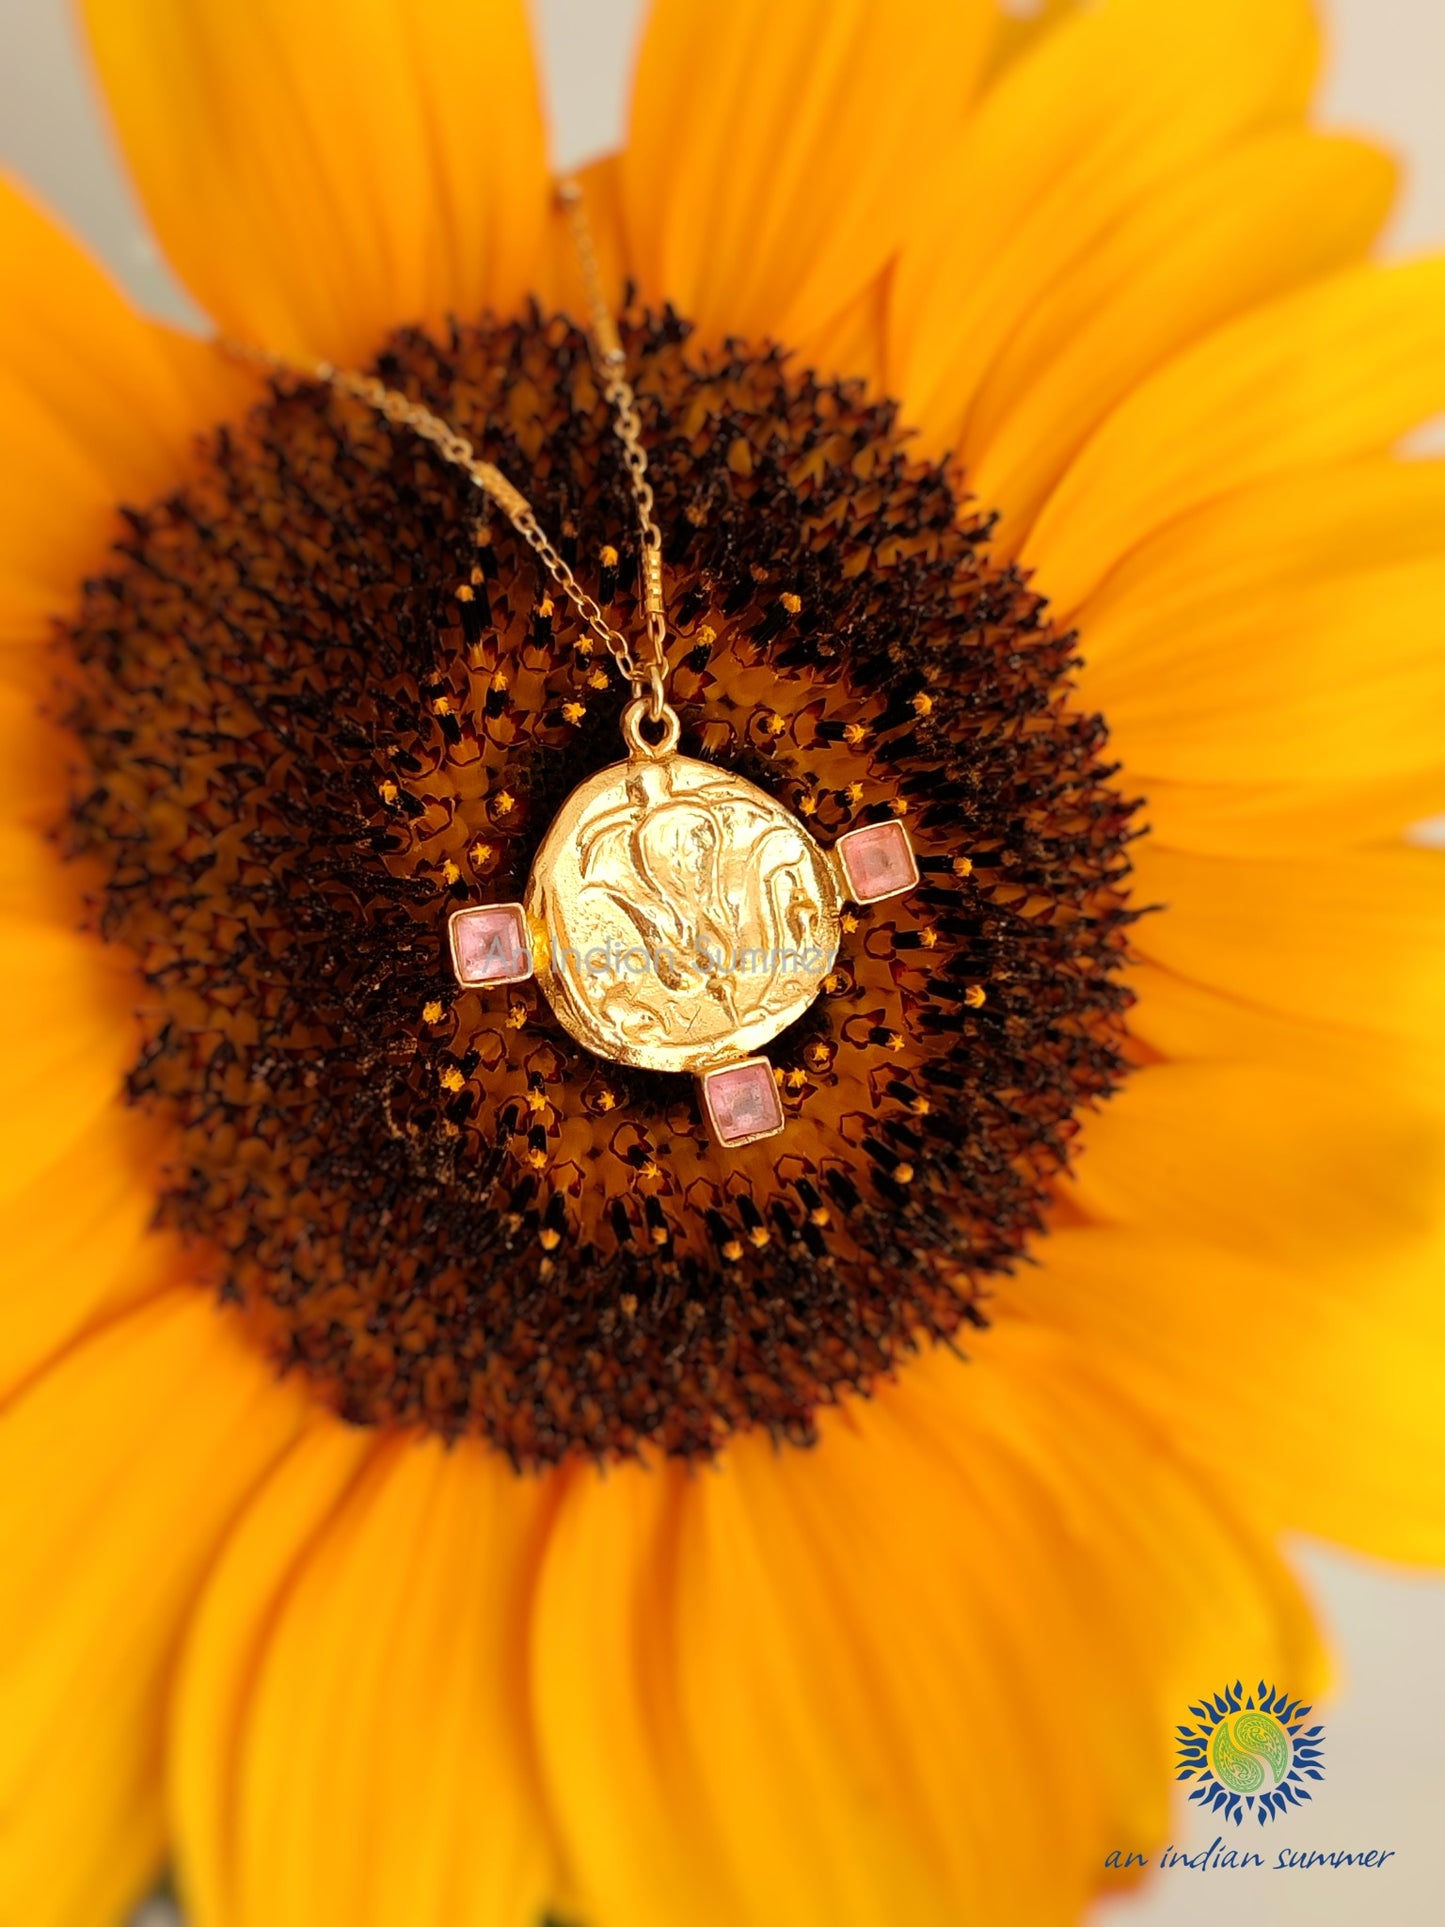 Talisman Medal Necklace - Lotus | Pink Jade | 22 Carat Gold Plated Semi Precious Stones | An Indian Summer | Seasonless Timeless Sustainable Ethical Authentic Artisan Conscious Clothing Lifestyle Brand